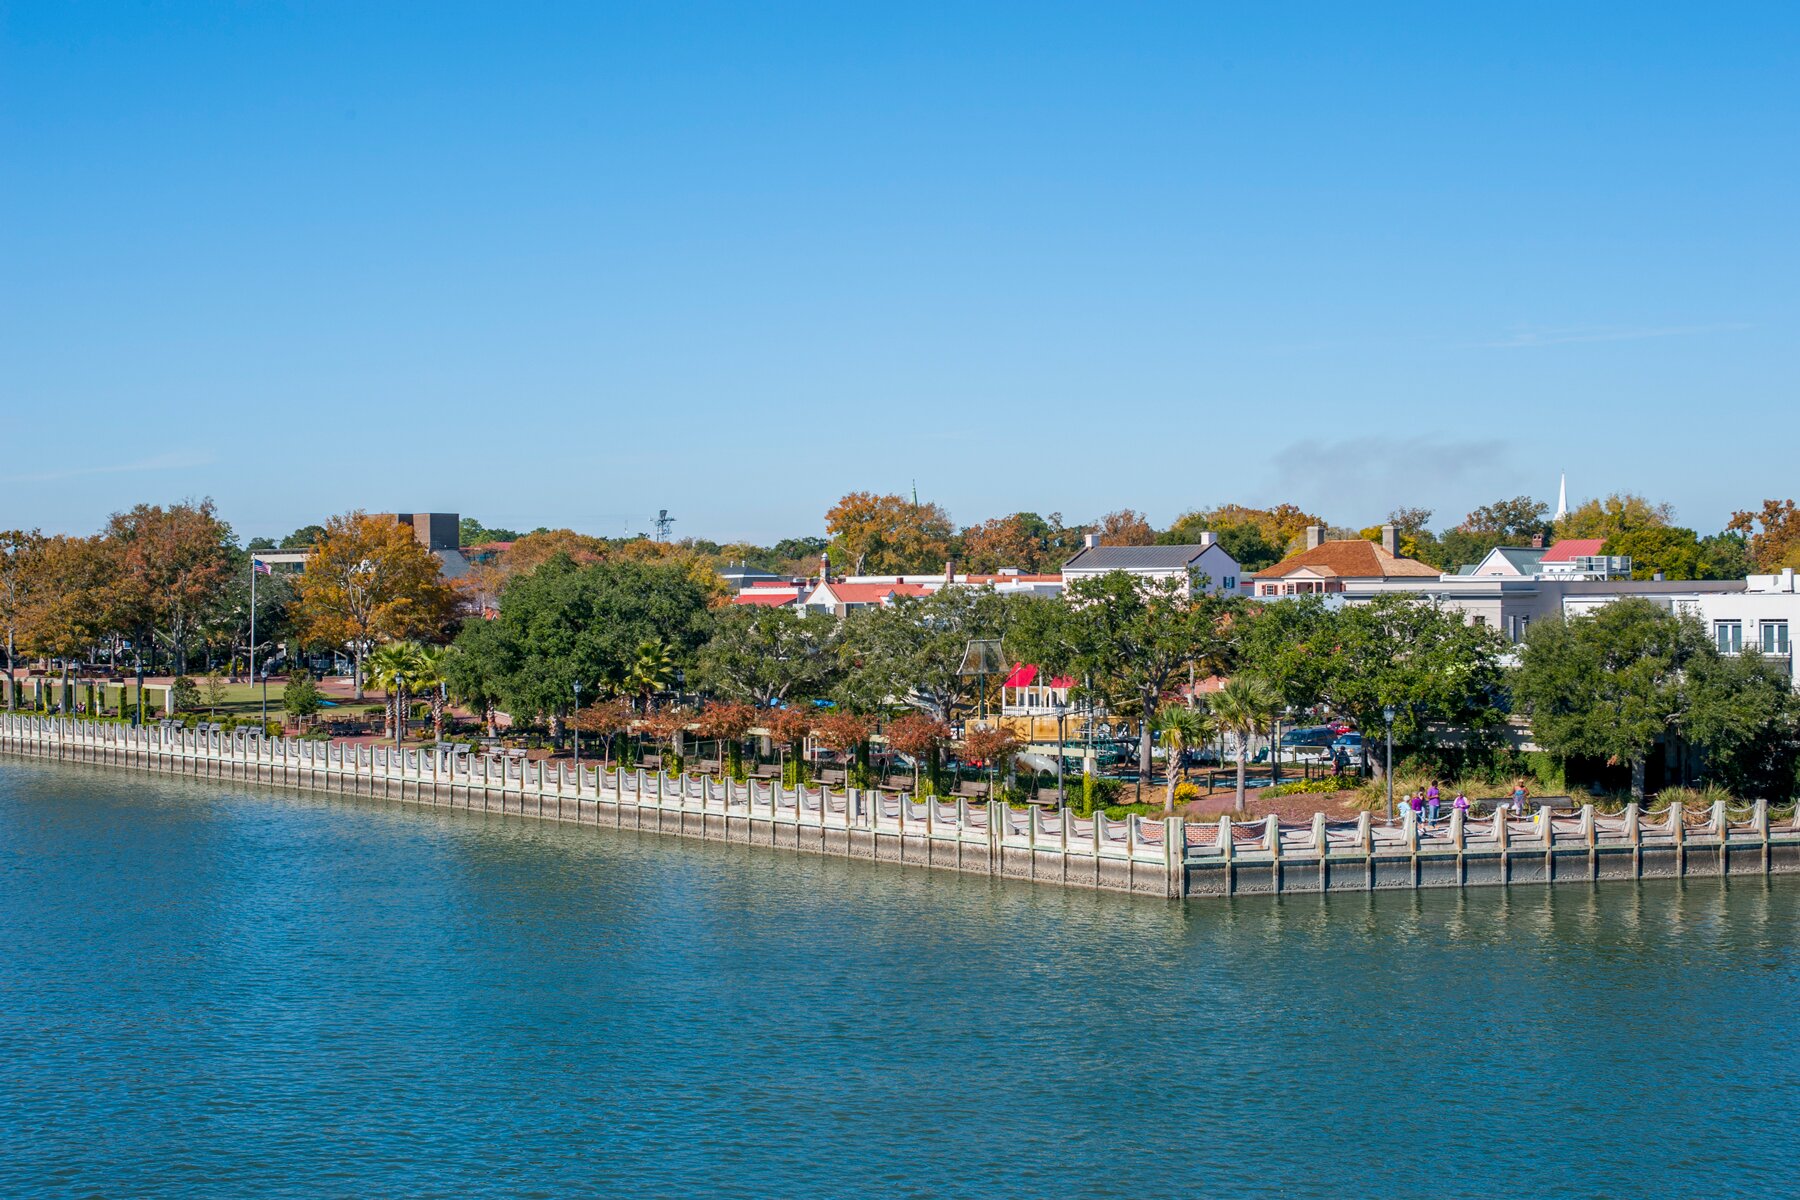 View of the Henry C. Chambers Waterfront Park in Beaufort, South Carolina, USA.